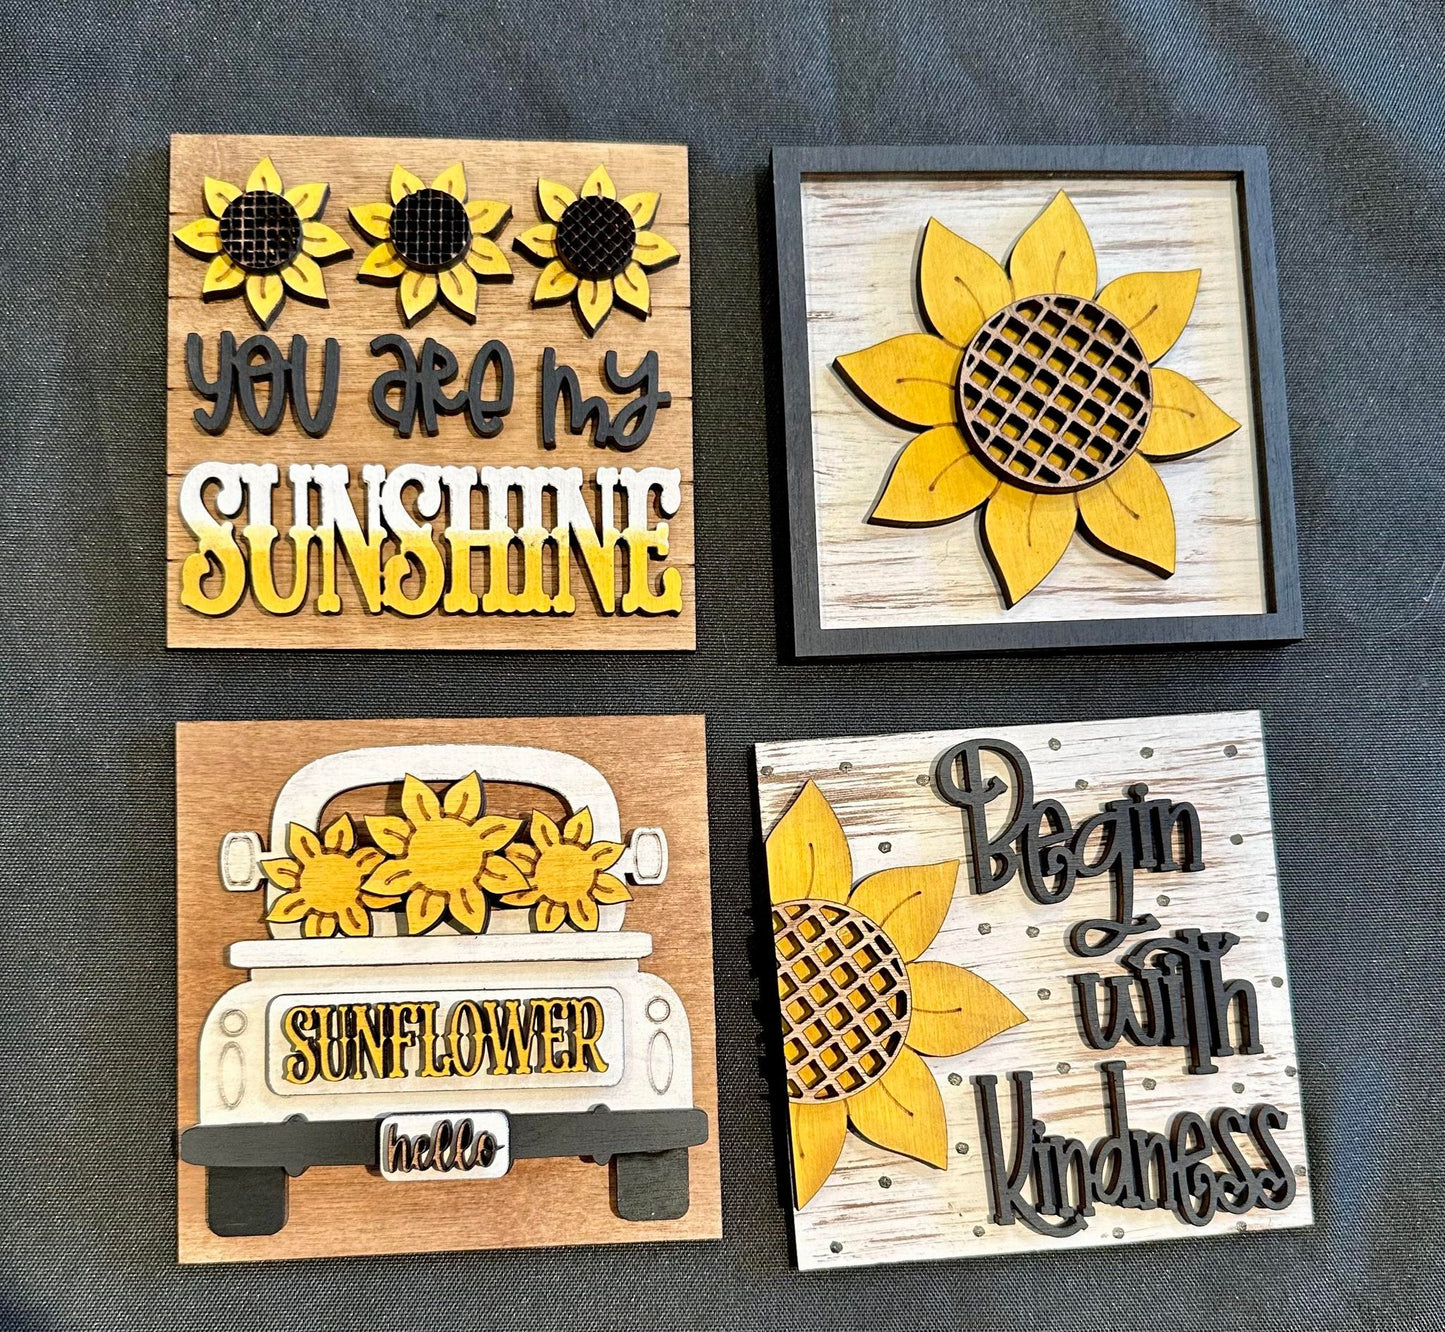 3D Interchangeable Square INSERTS ONLY - Fall and Halloween